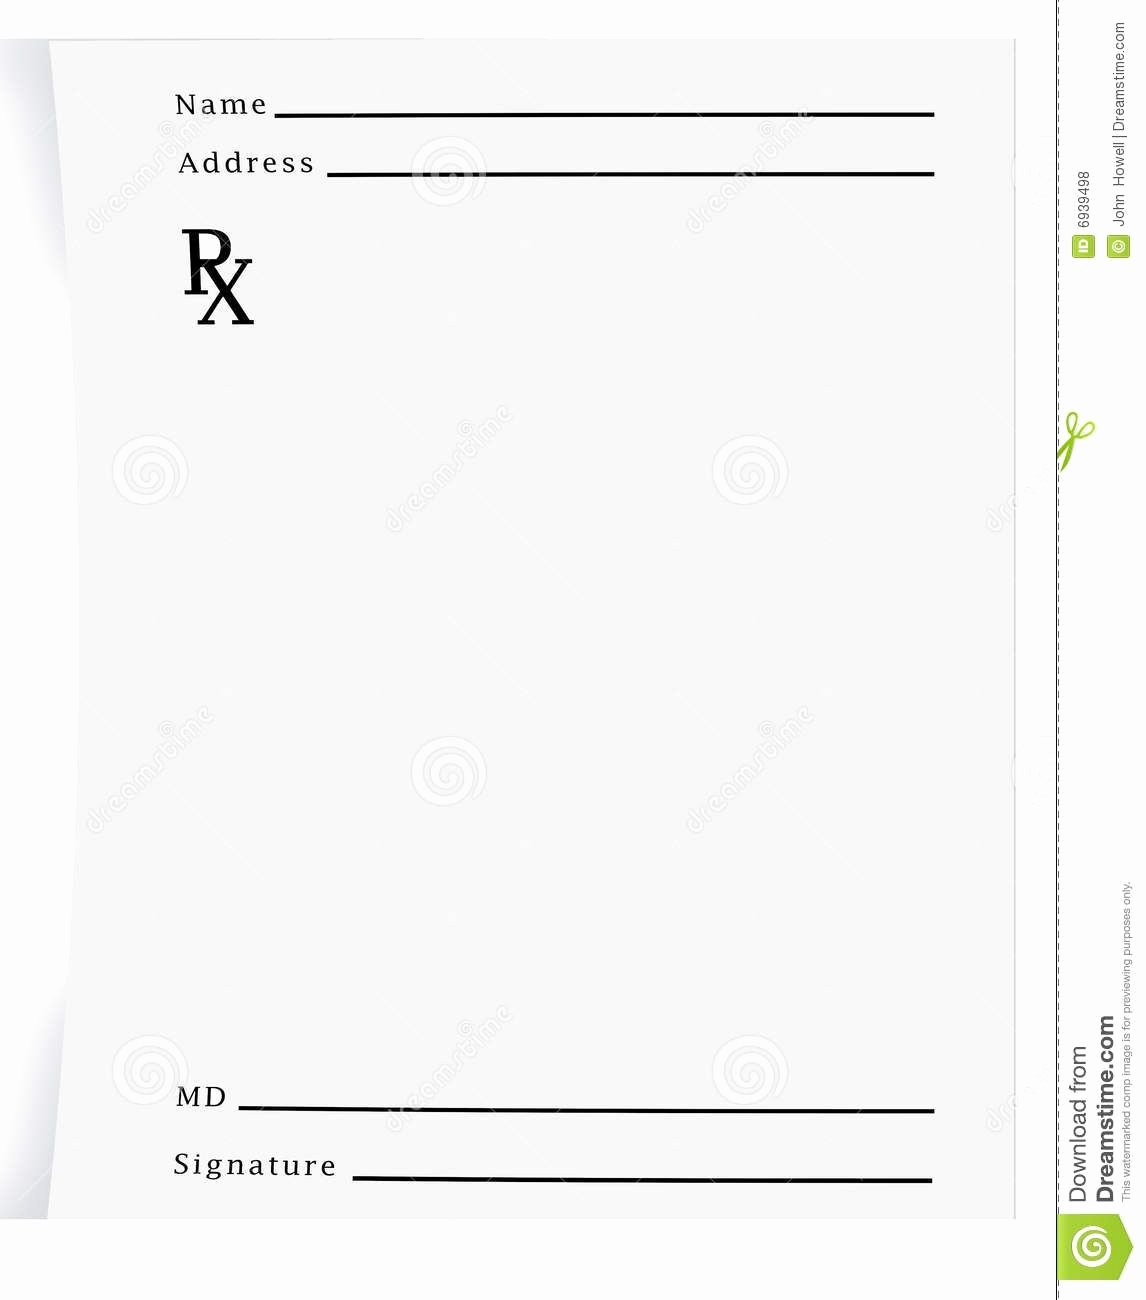 Prescription Pad Blank Download From Over 27 Million